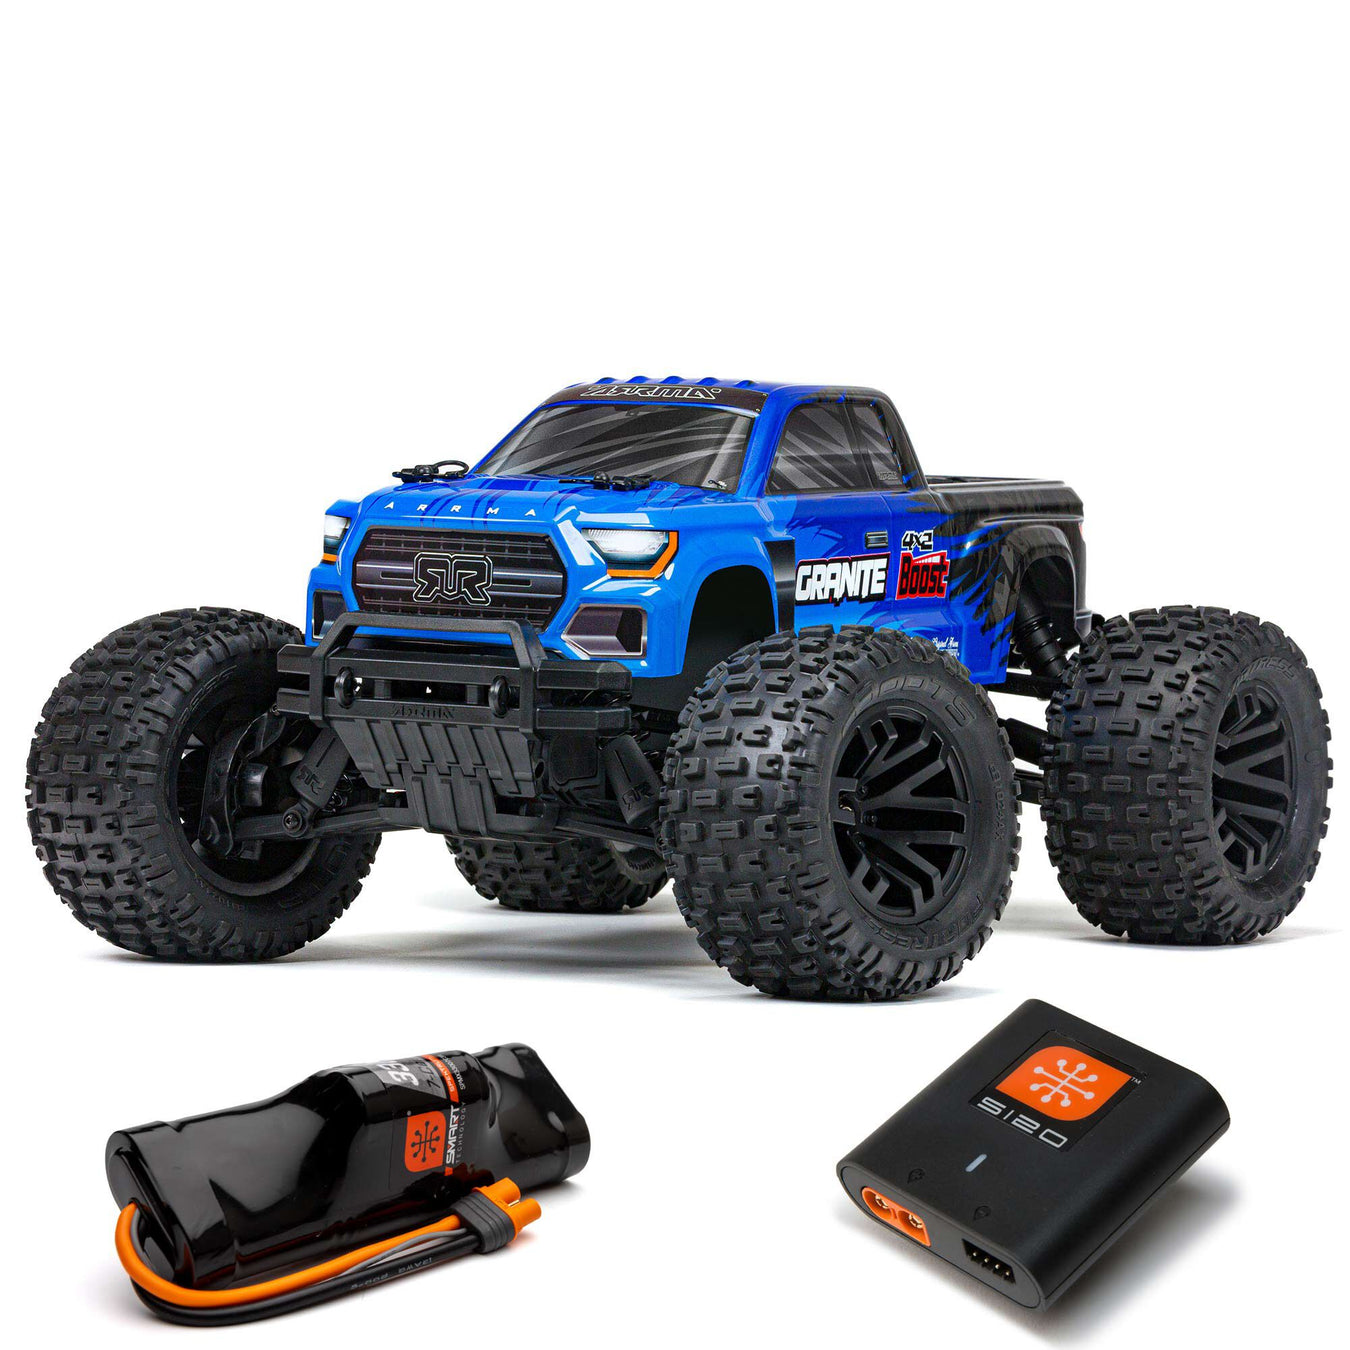 Brand_1RC-Racing, Product_Accessories